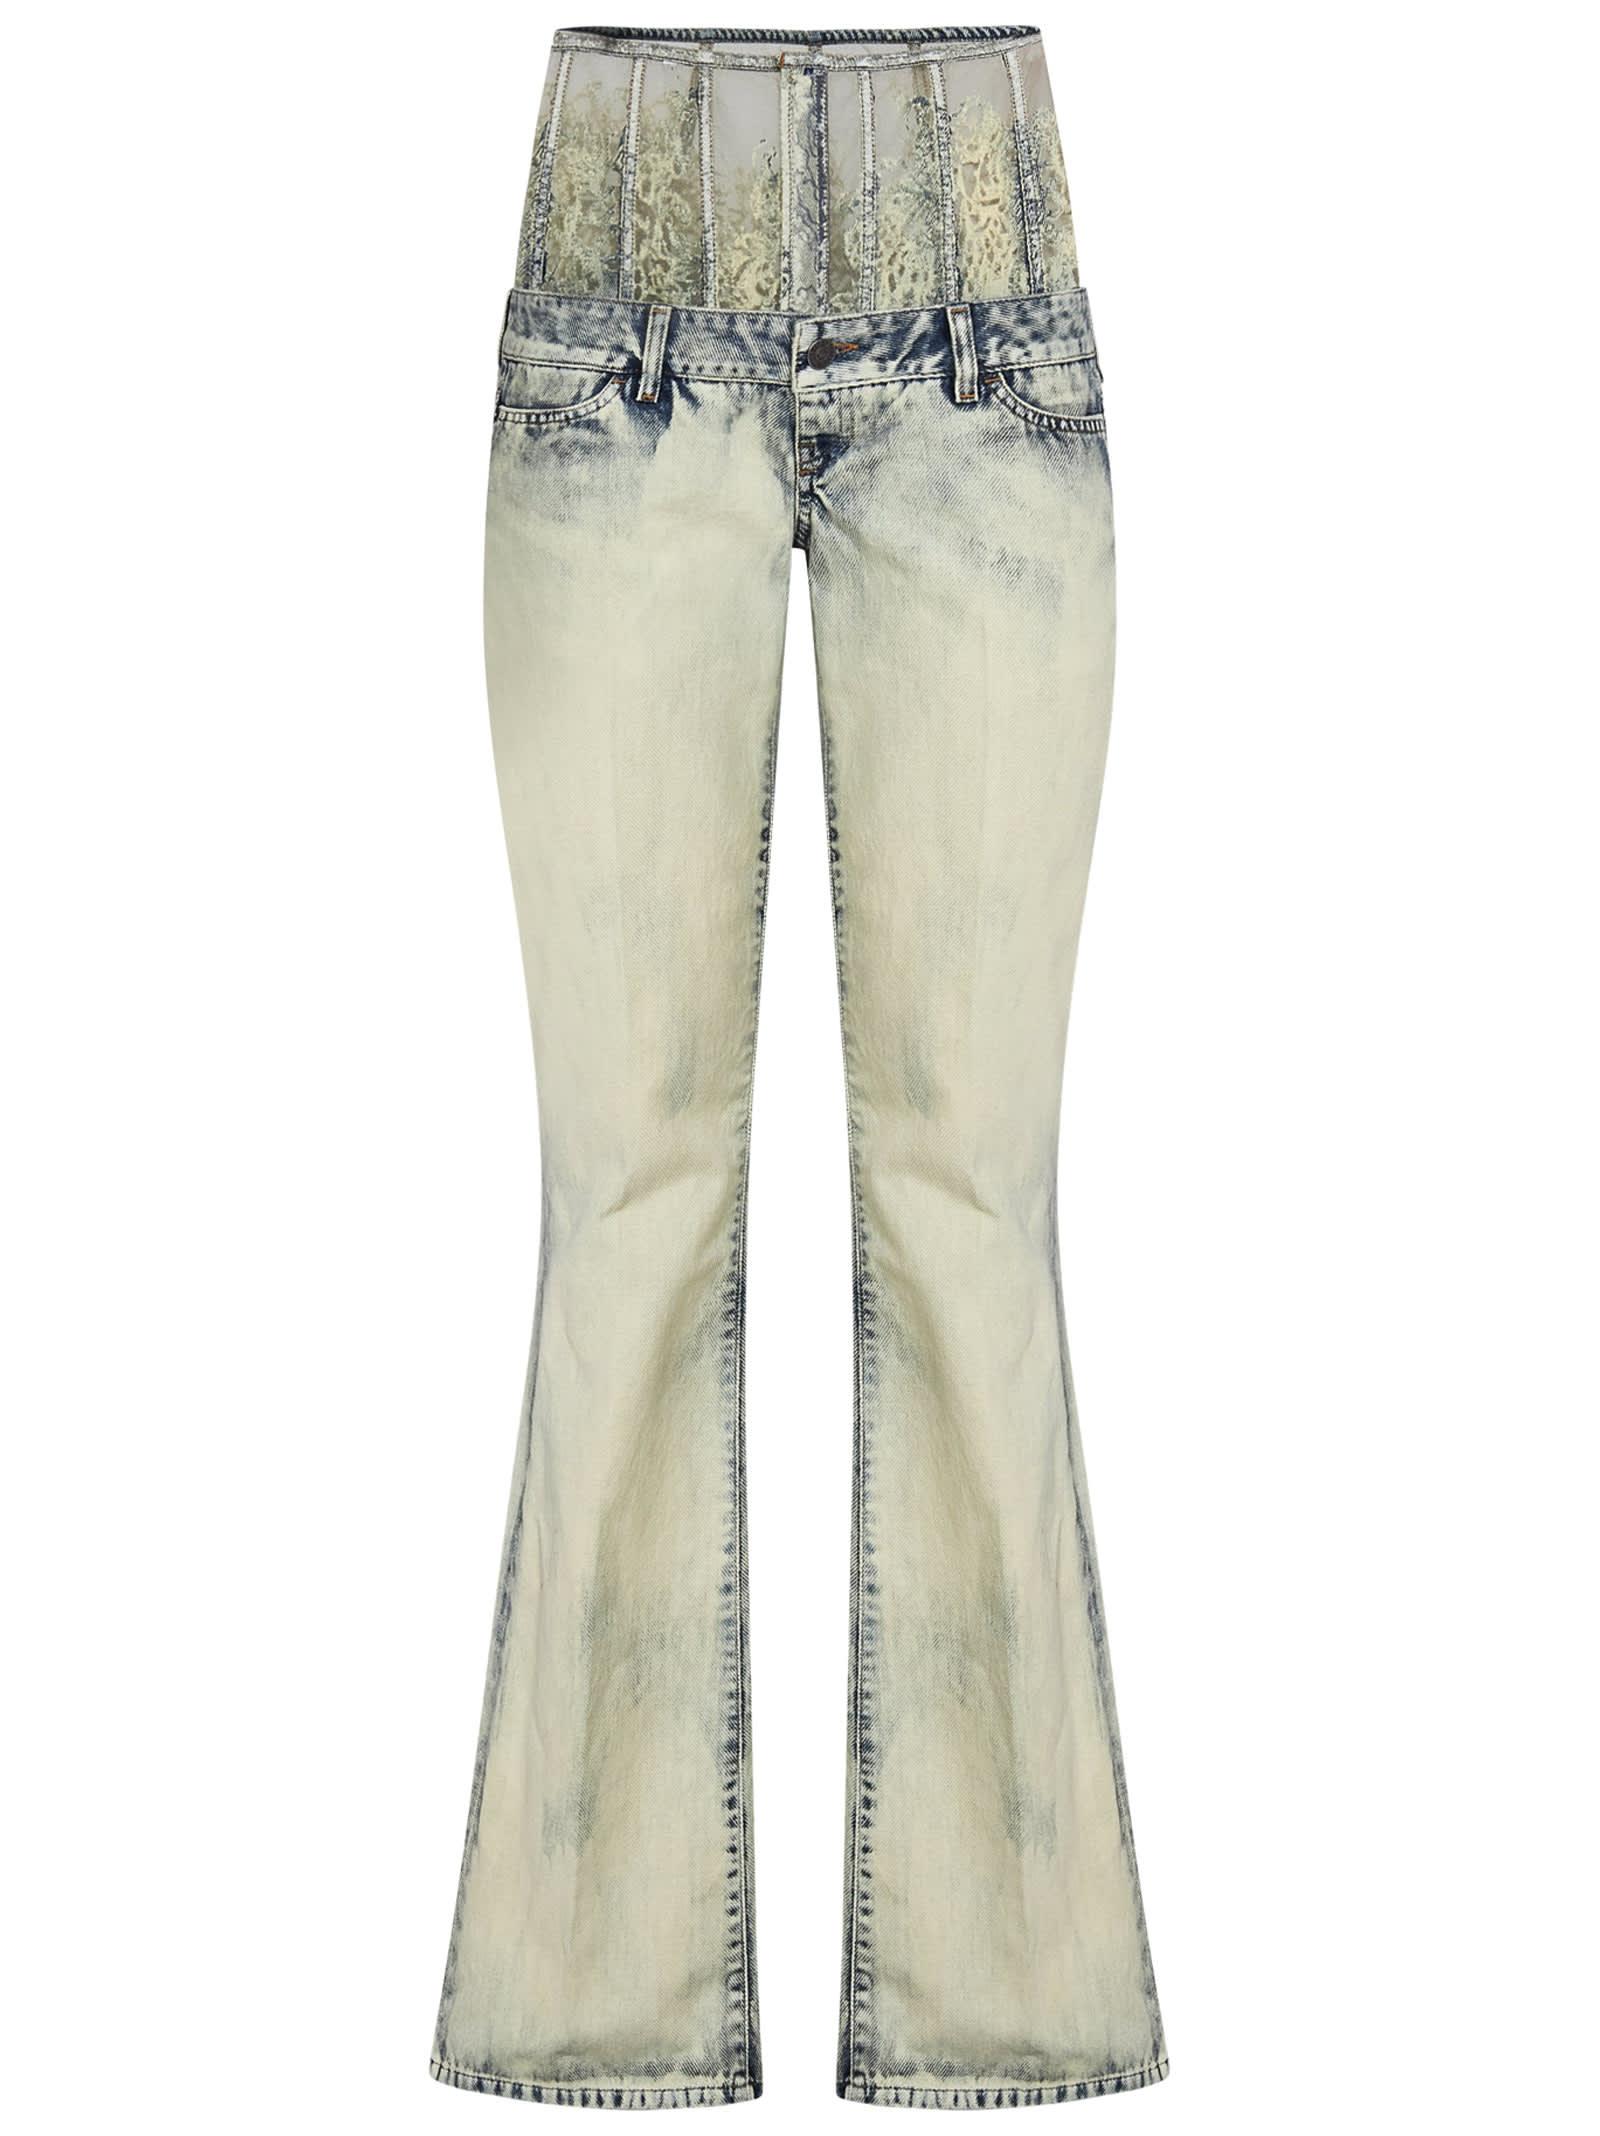 DIESEL 1969 D-ebbey 068gp Bootcut And Flare Jeans in Blue | Lyst